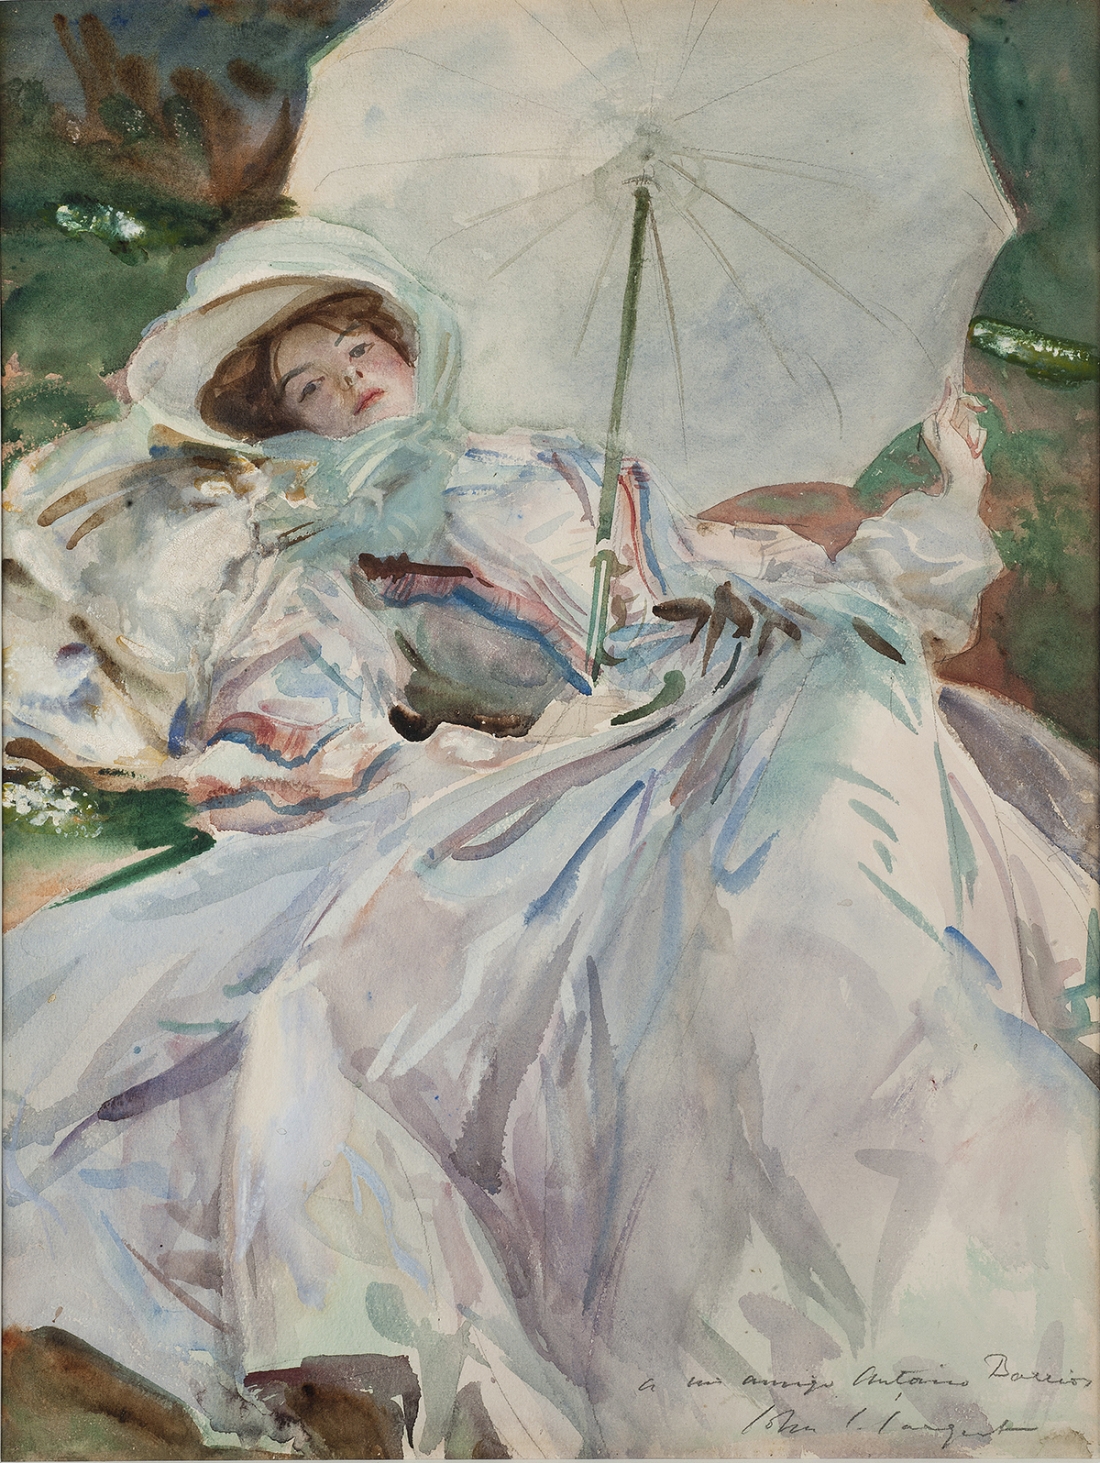 Sargent: The Watercolours brings together the master's greatest works